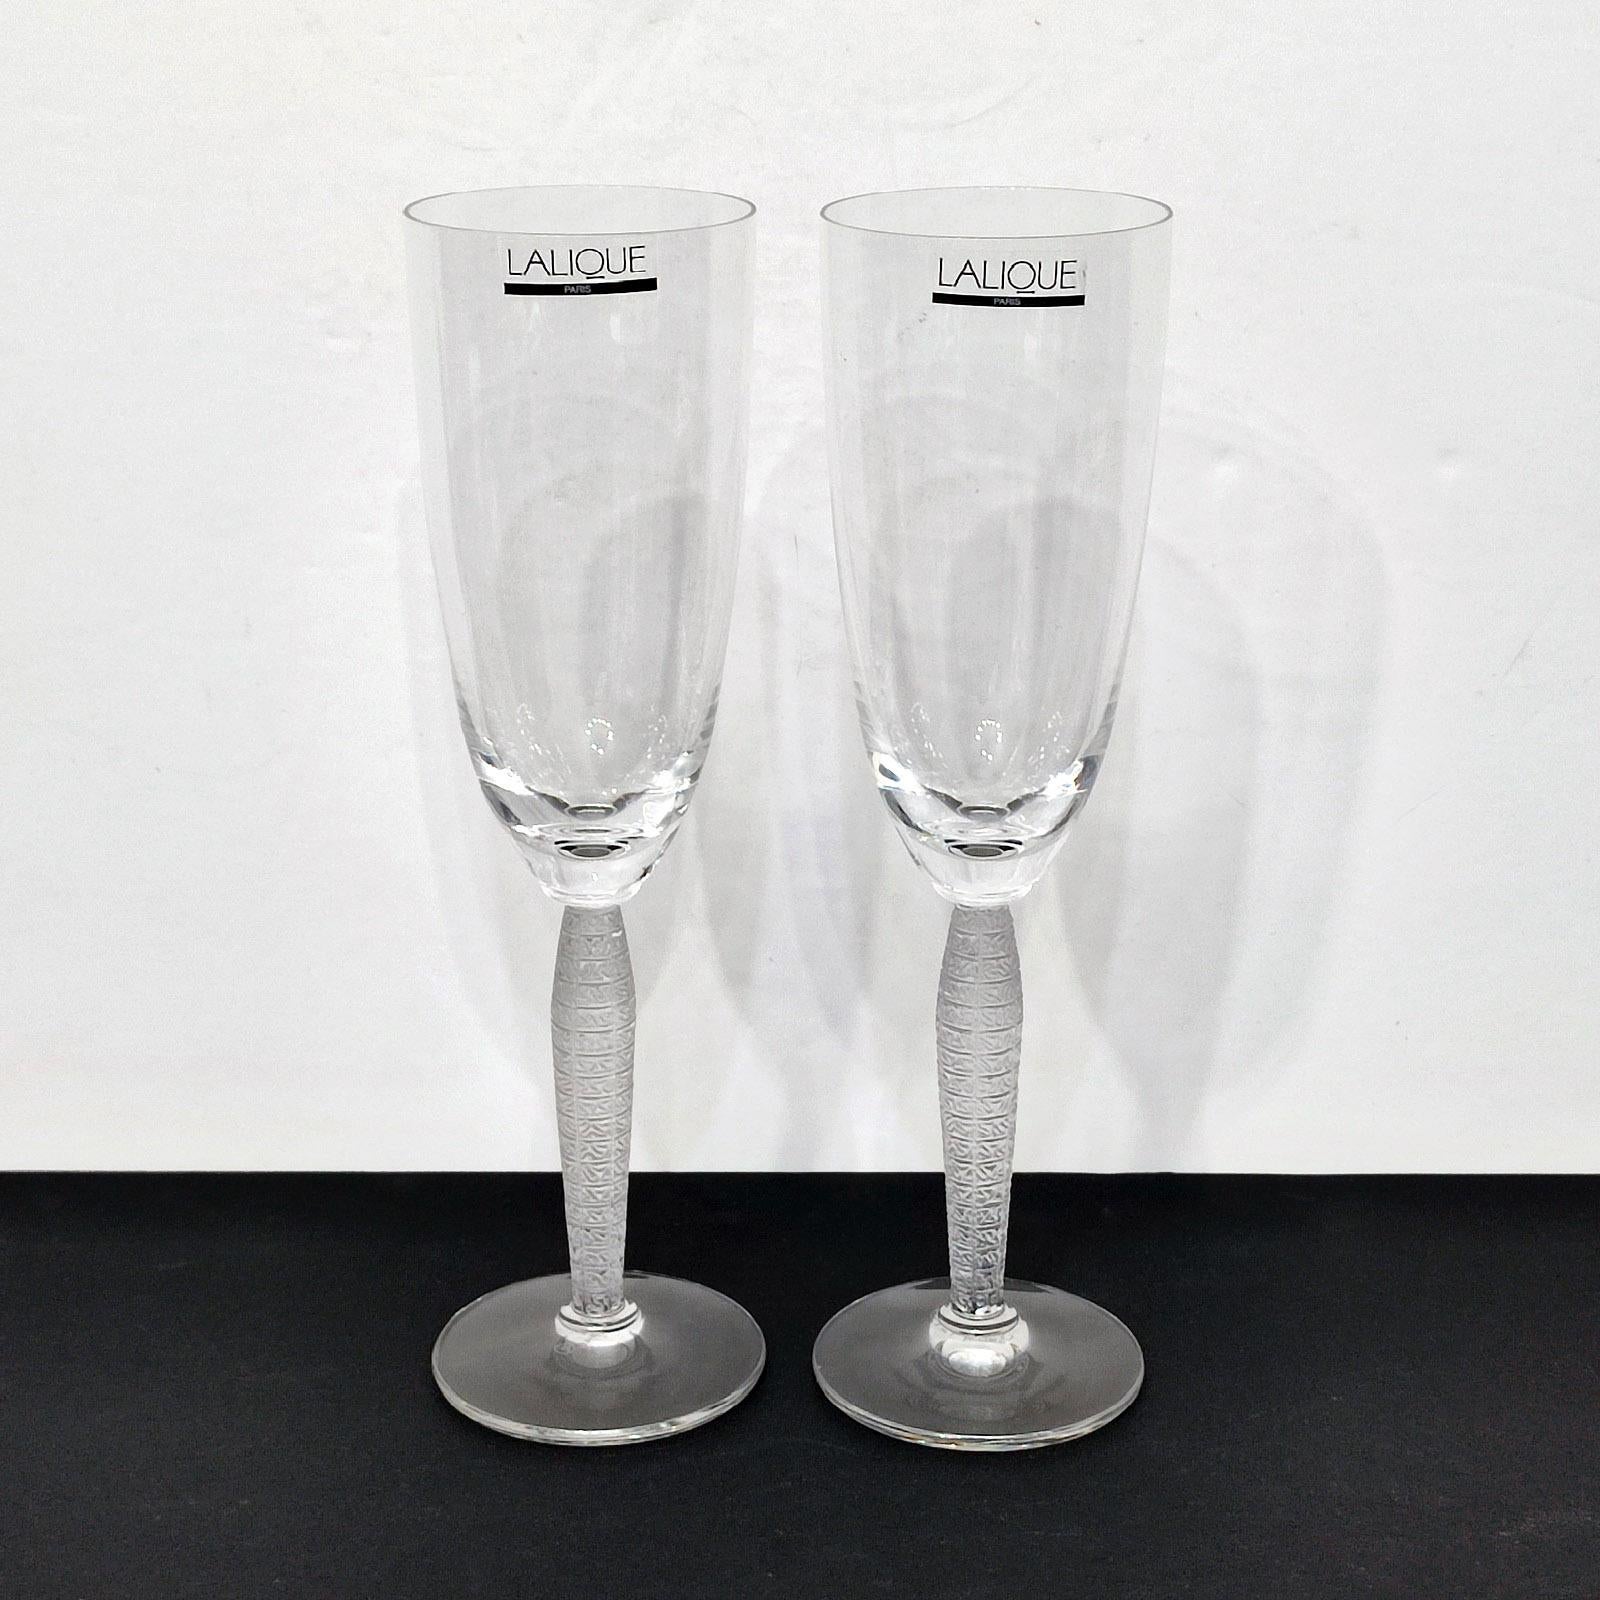 French Lalique Set Of 2 Louvre Champagne Flutes